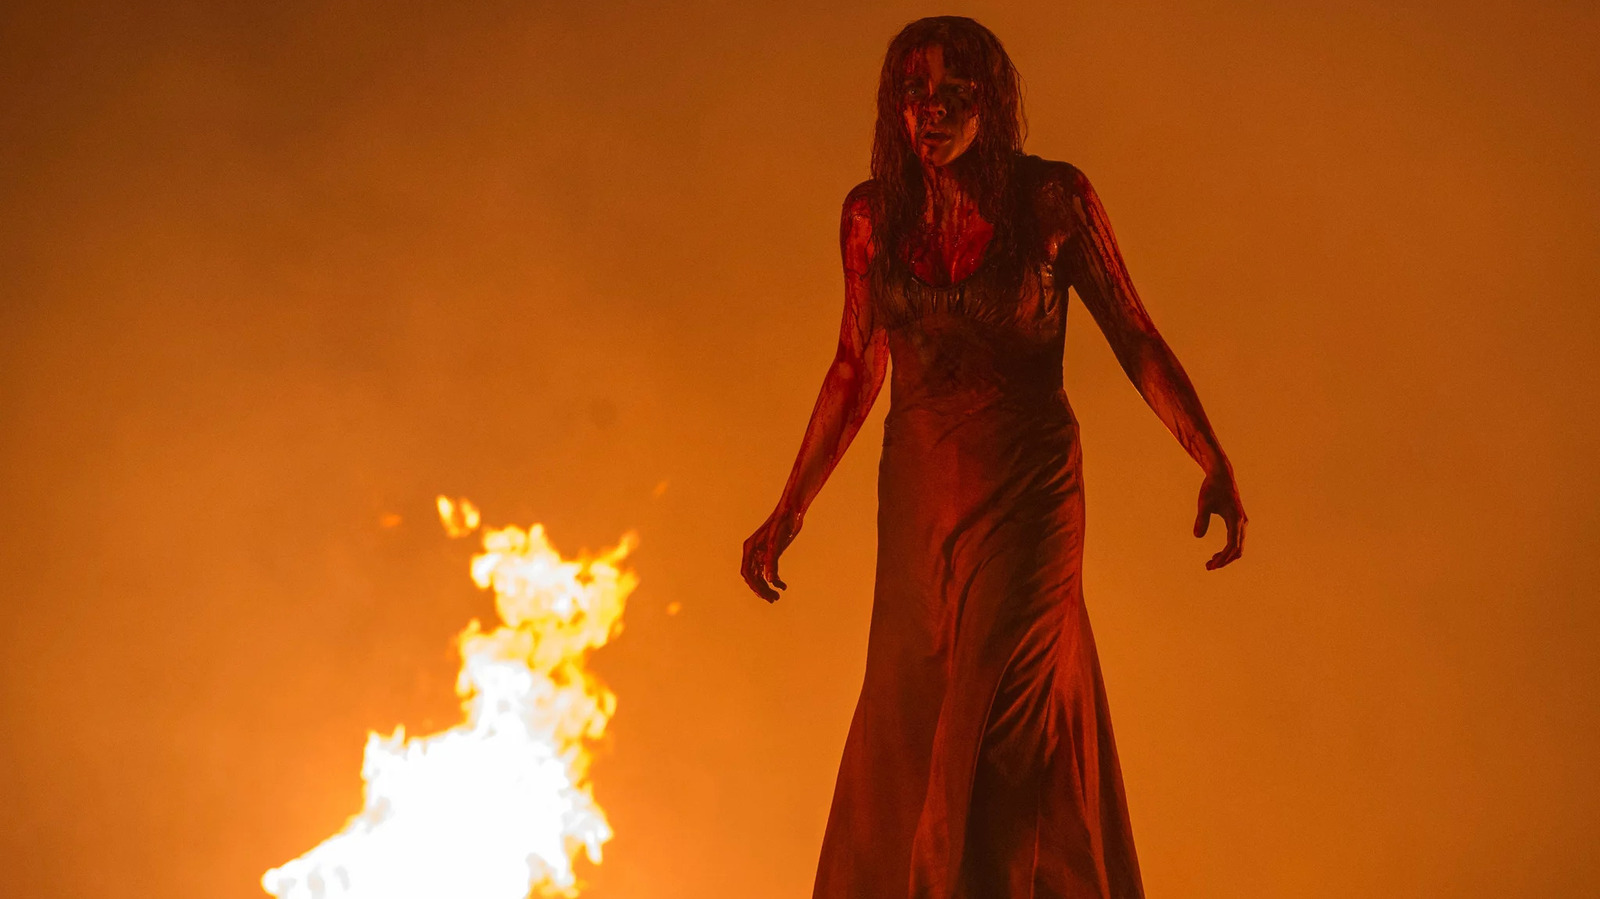 The Carrie Alternate Ending Makes For A Very Different Movie